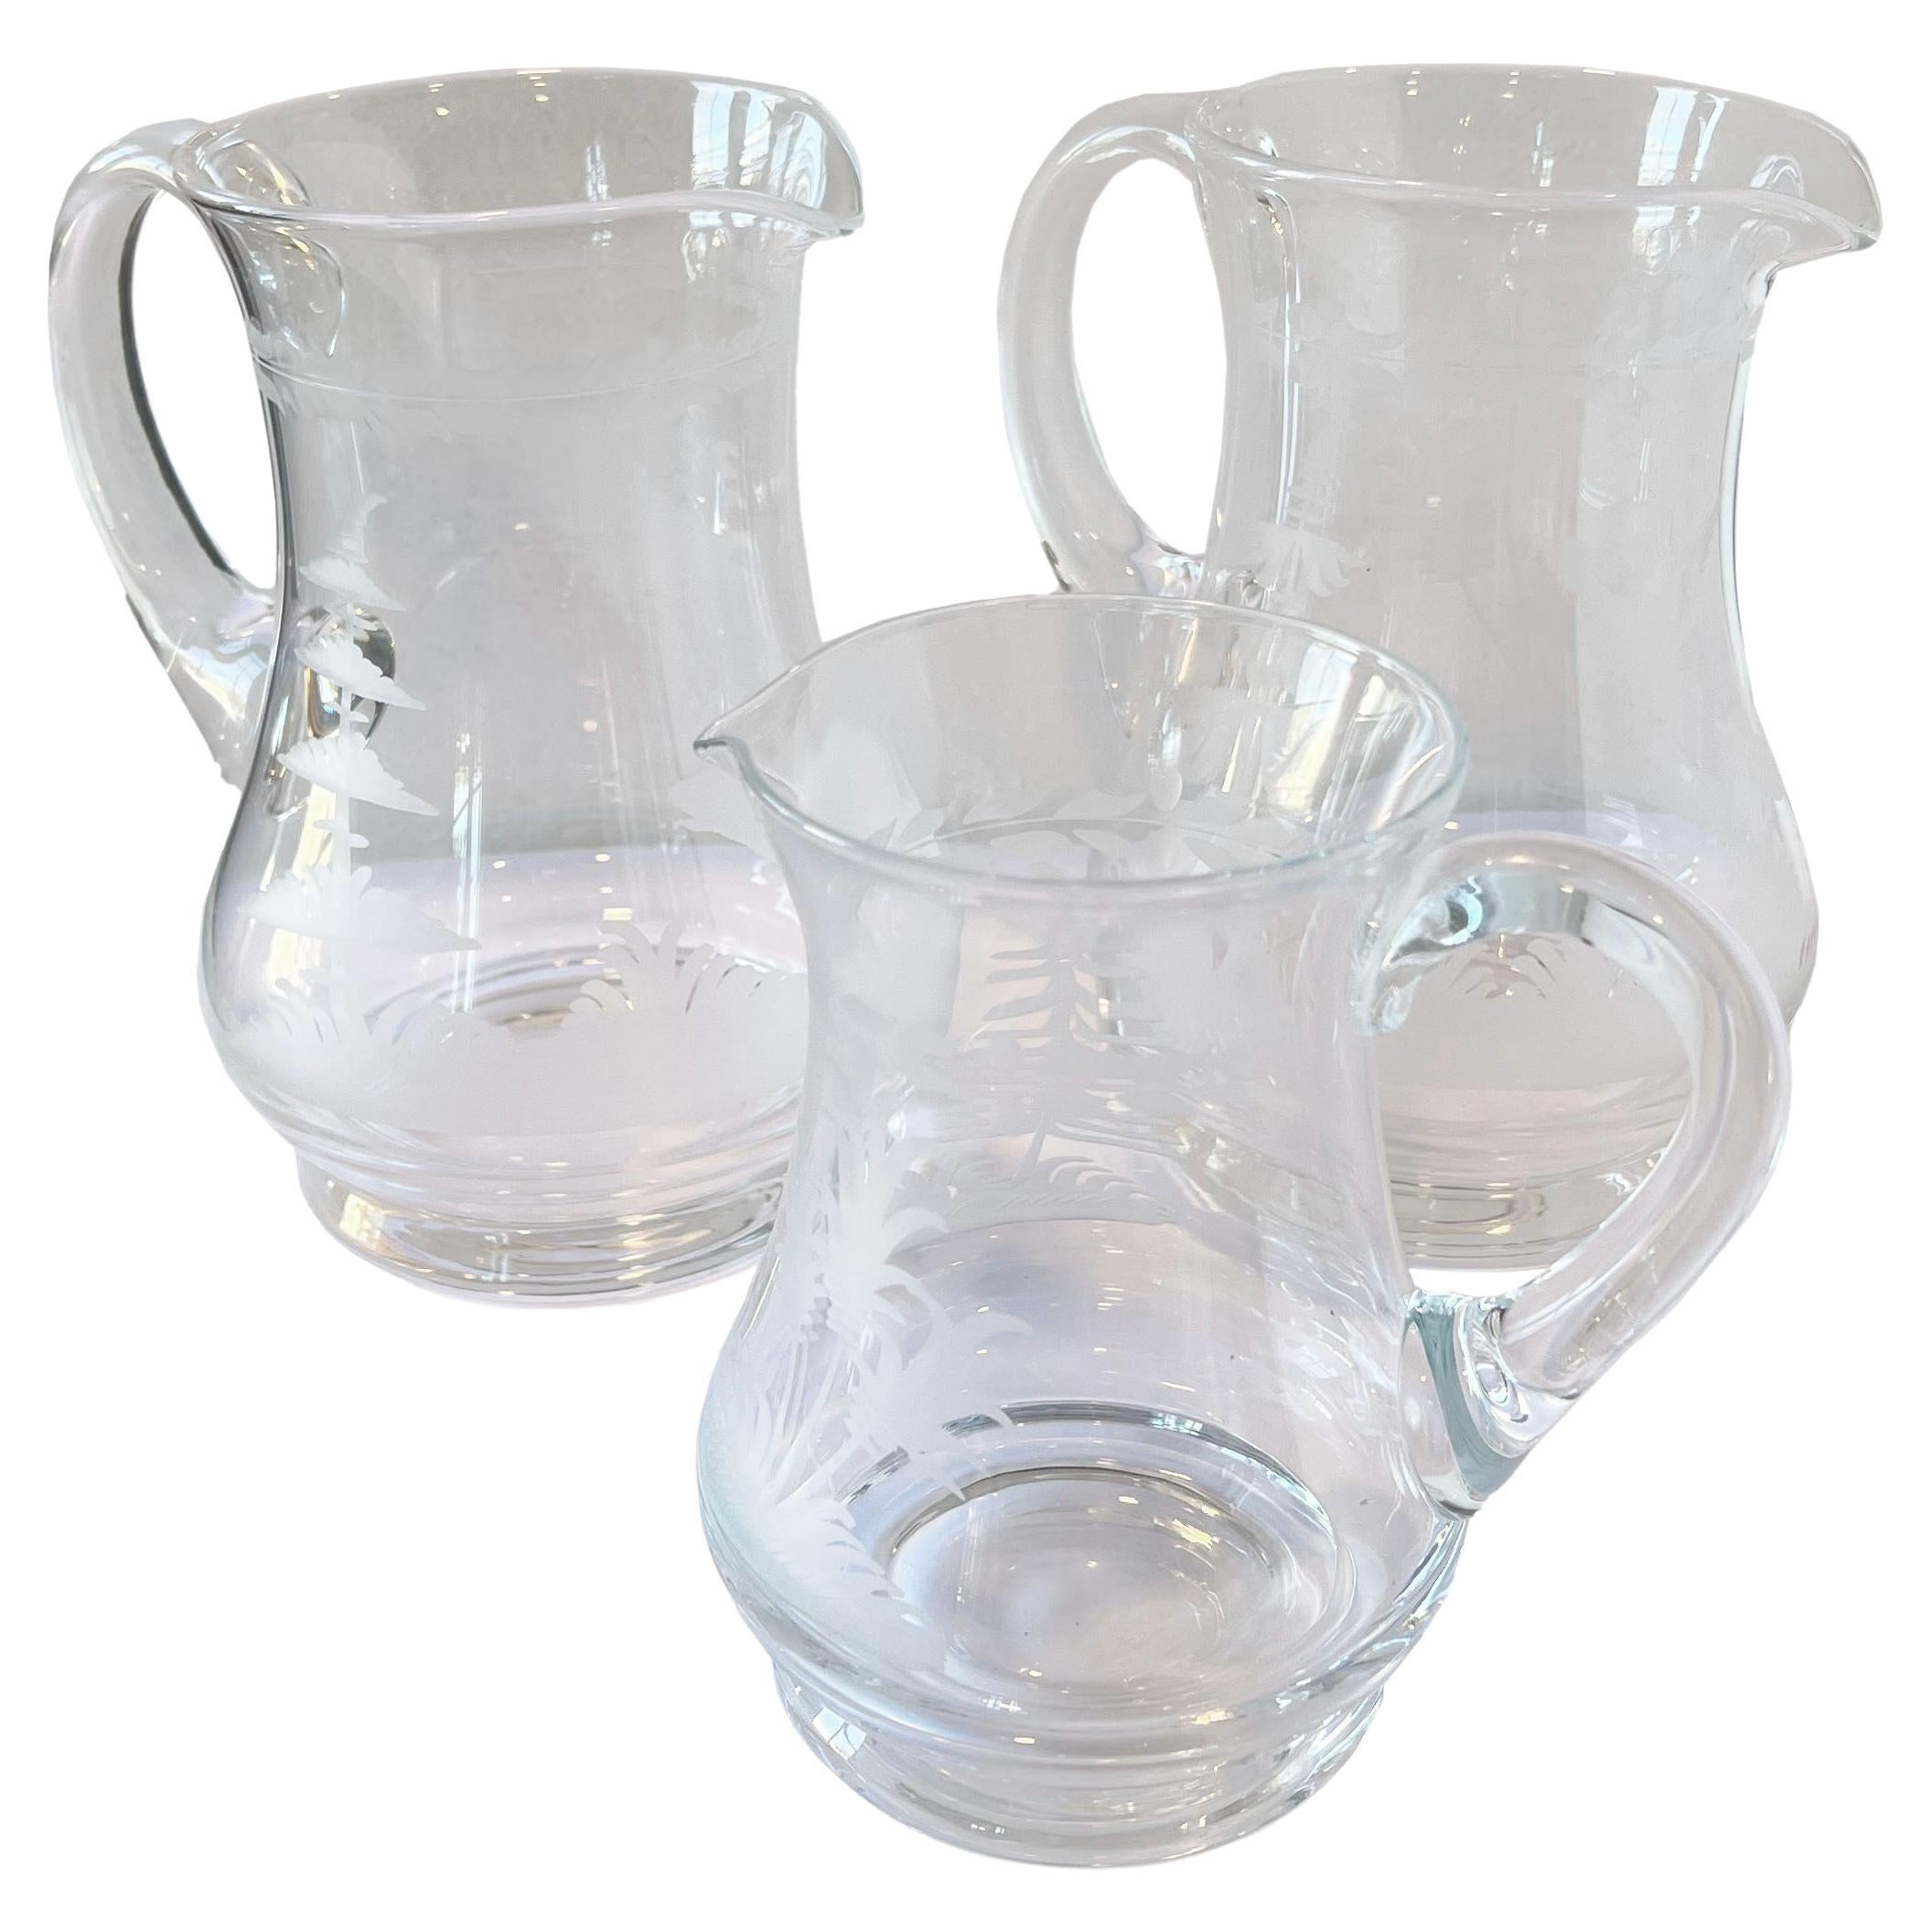 Set of 3 Glass Etched Pitchers from Andre Leon Talley's Private Collection For Sale